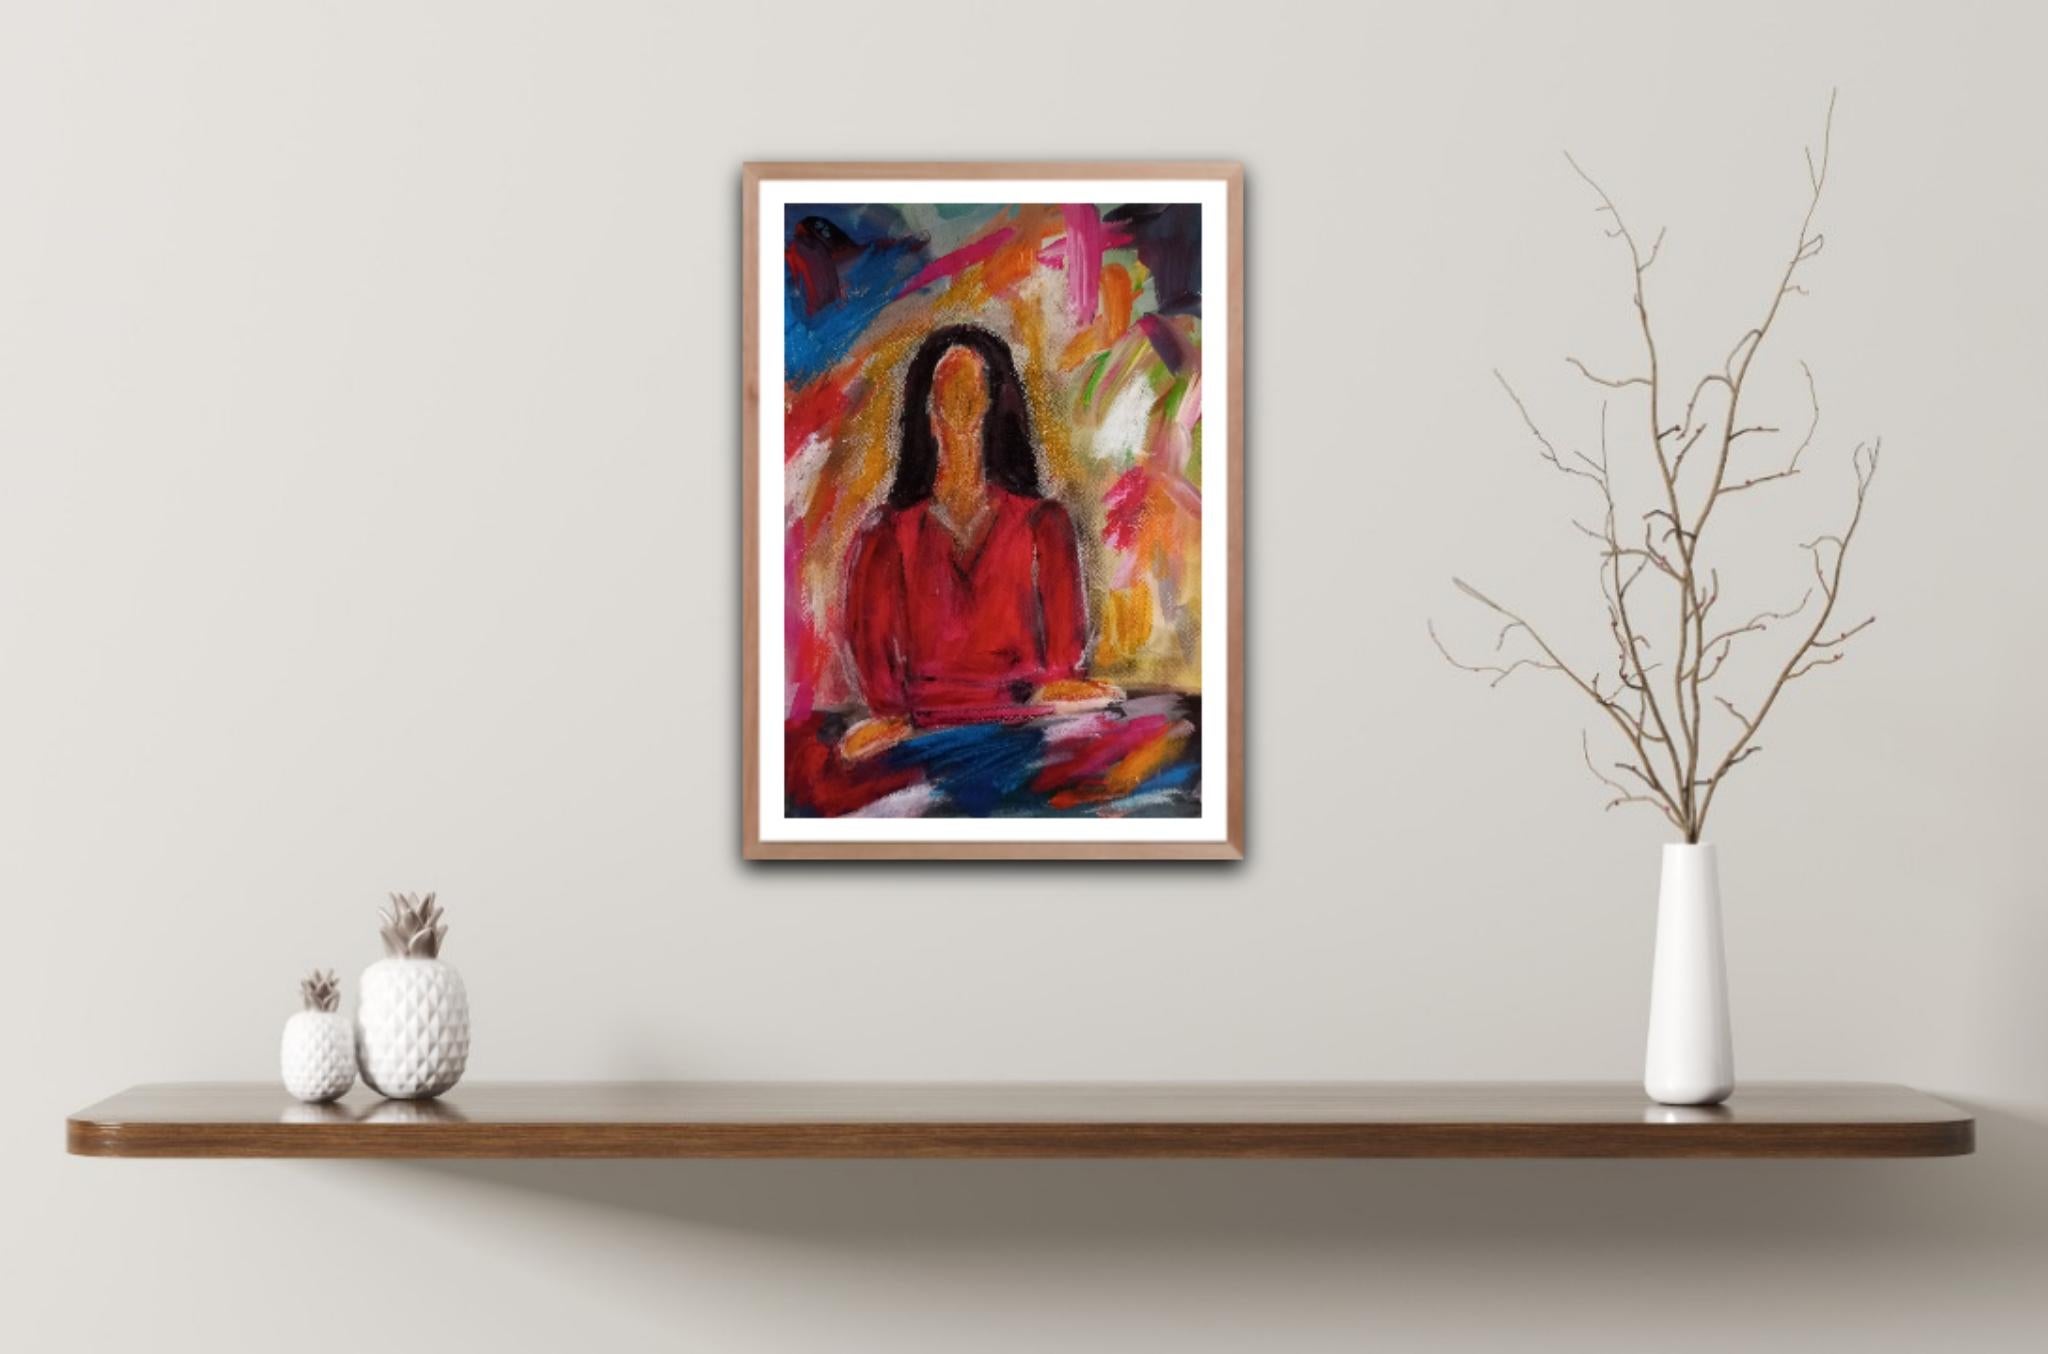 I enjoy working on impressionist artworks with an expressive touch. This artwork makes part of one of my favorite series dedicated to women whom I always want to represent as strong, determined, courageous and beautiful creatures. 

Please read the